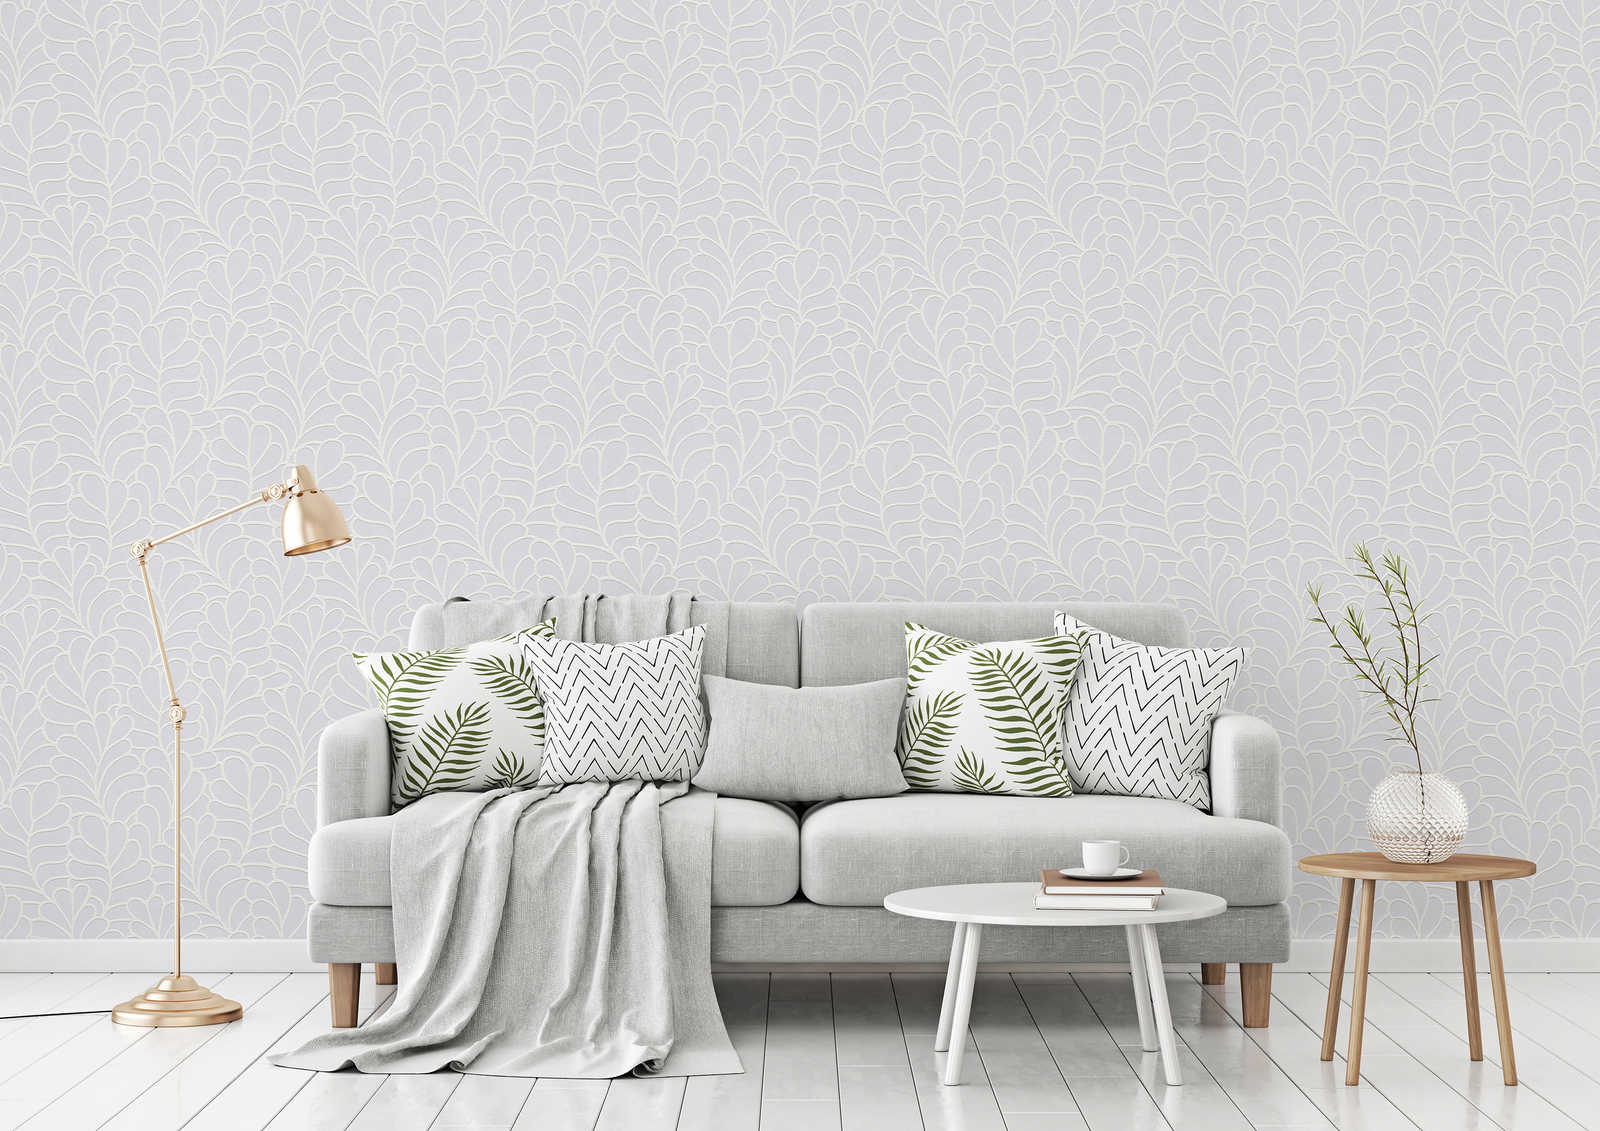             Paintable wallpaper with floral leaf pattern - Paintable
        